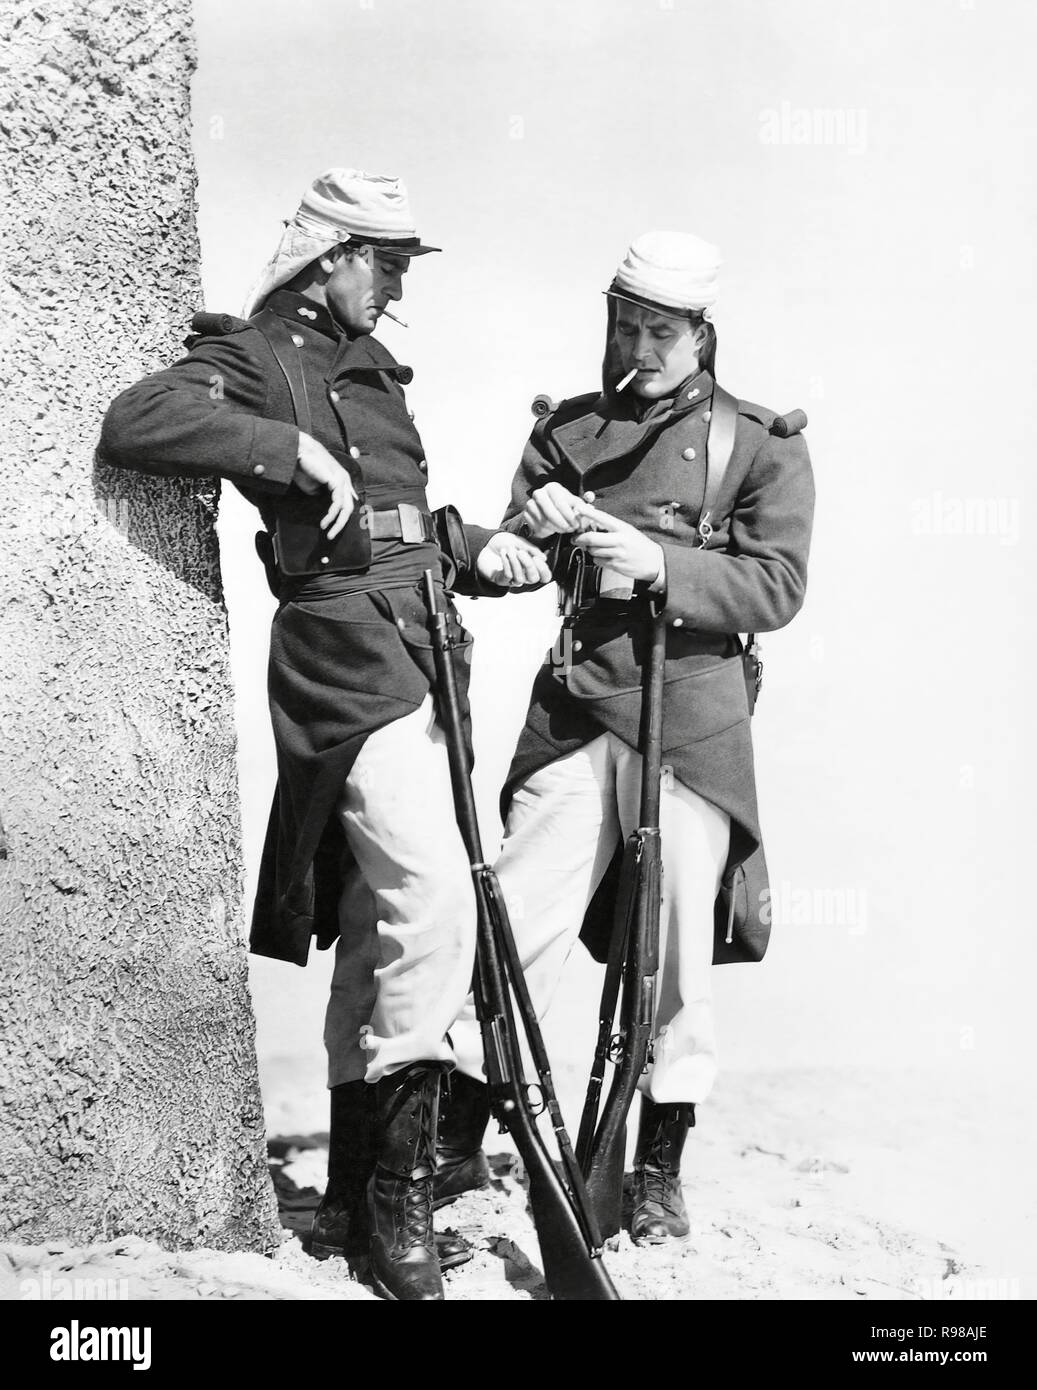 Original film title: BEAU GESTE. English title: BEAU GESTE. Year: 1939. Director: WILLIAM A. WELLMAN. Stars: GARY COOPER; RAY MILLAND. Credit: PARAMOUNT PICTURES / Album Stock Photo